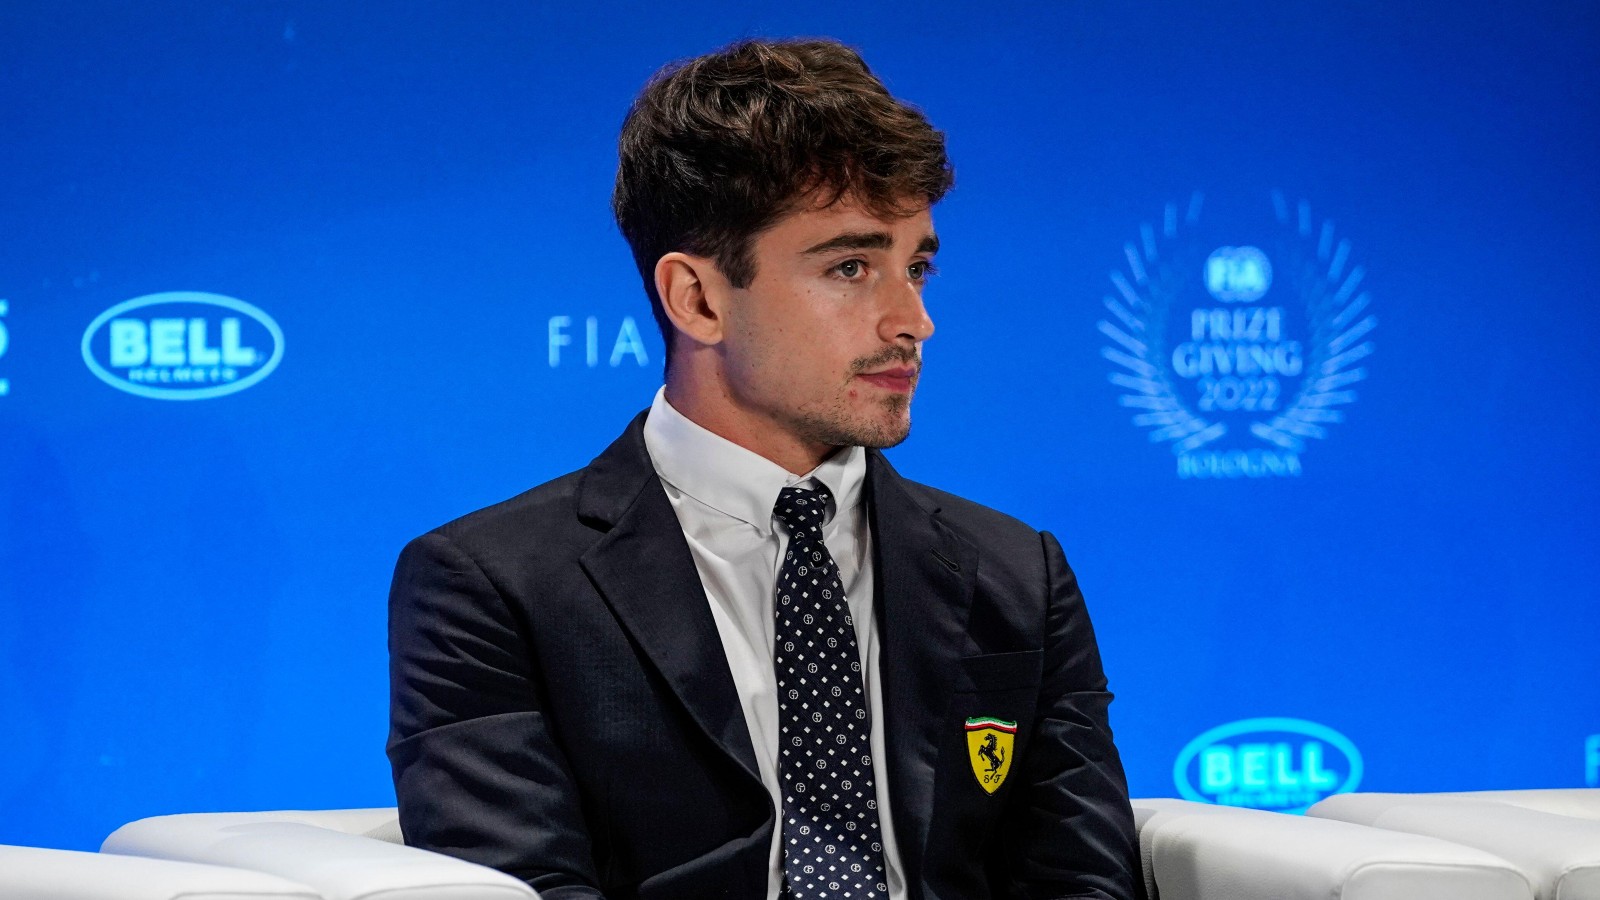 Ferrari driver Charles Leclerc in a suit. Italy, December 2022.